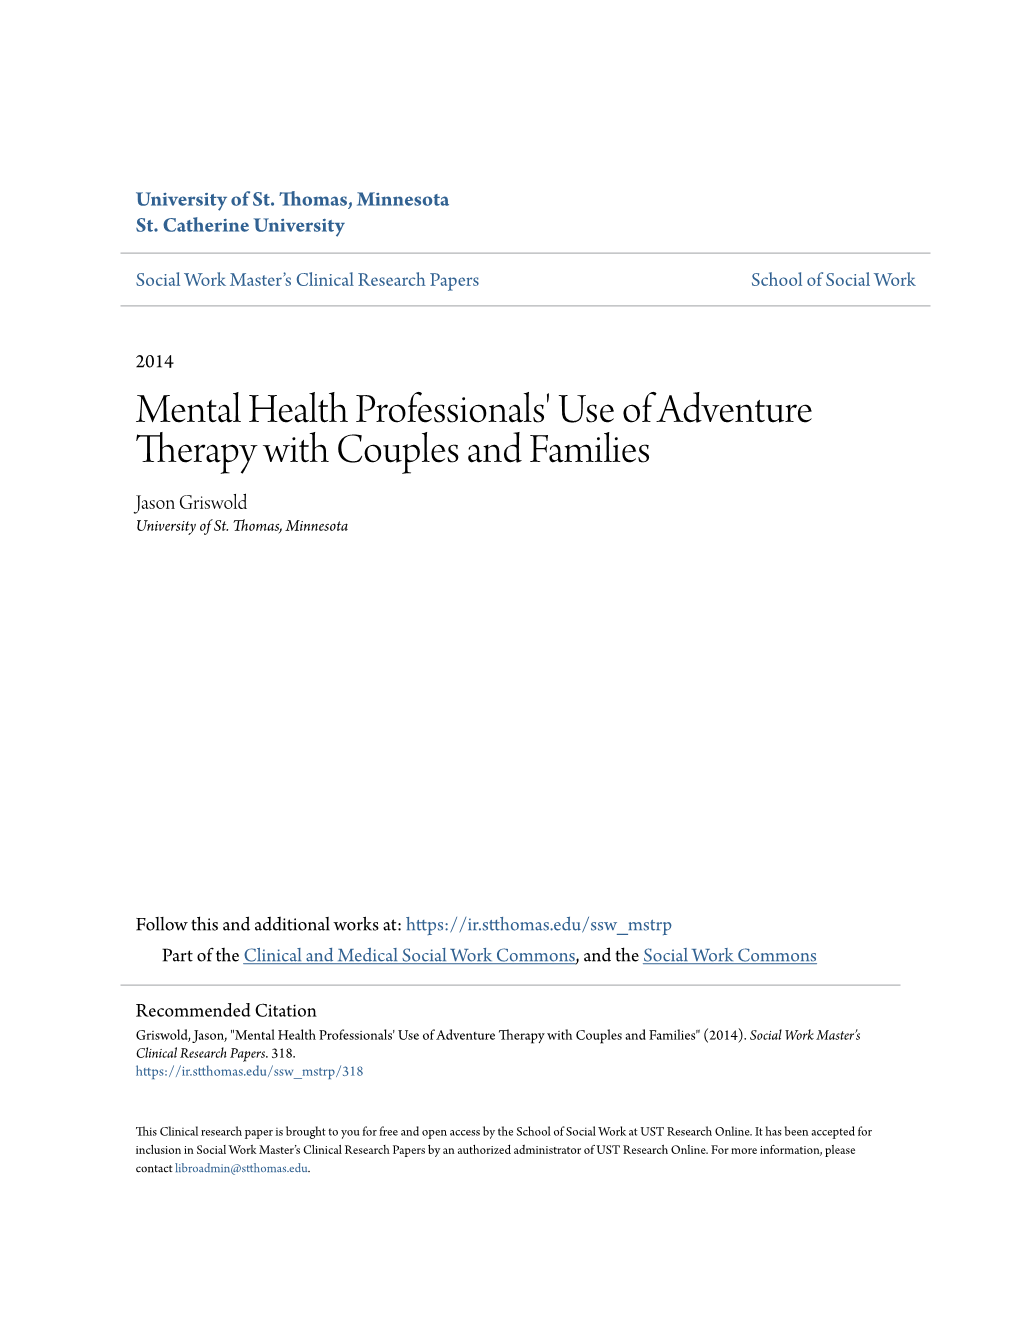 Mental Health Professionals' Use of Adventure Therapy with Couples and Families Jason Griswold University of St